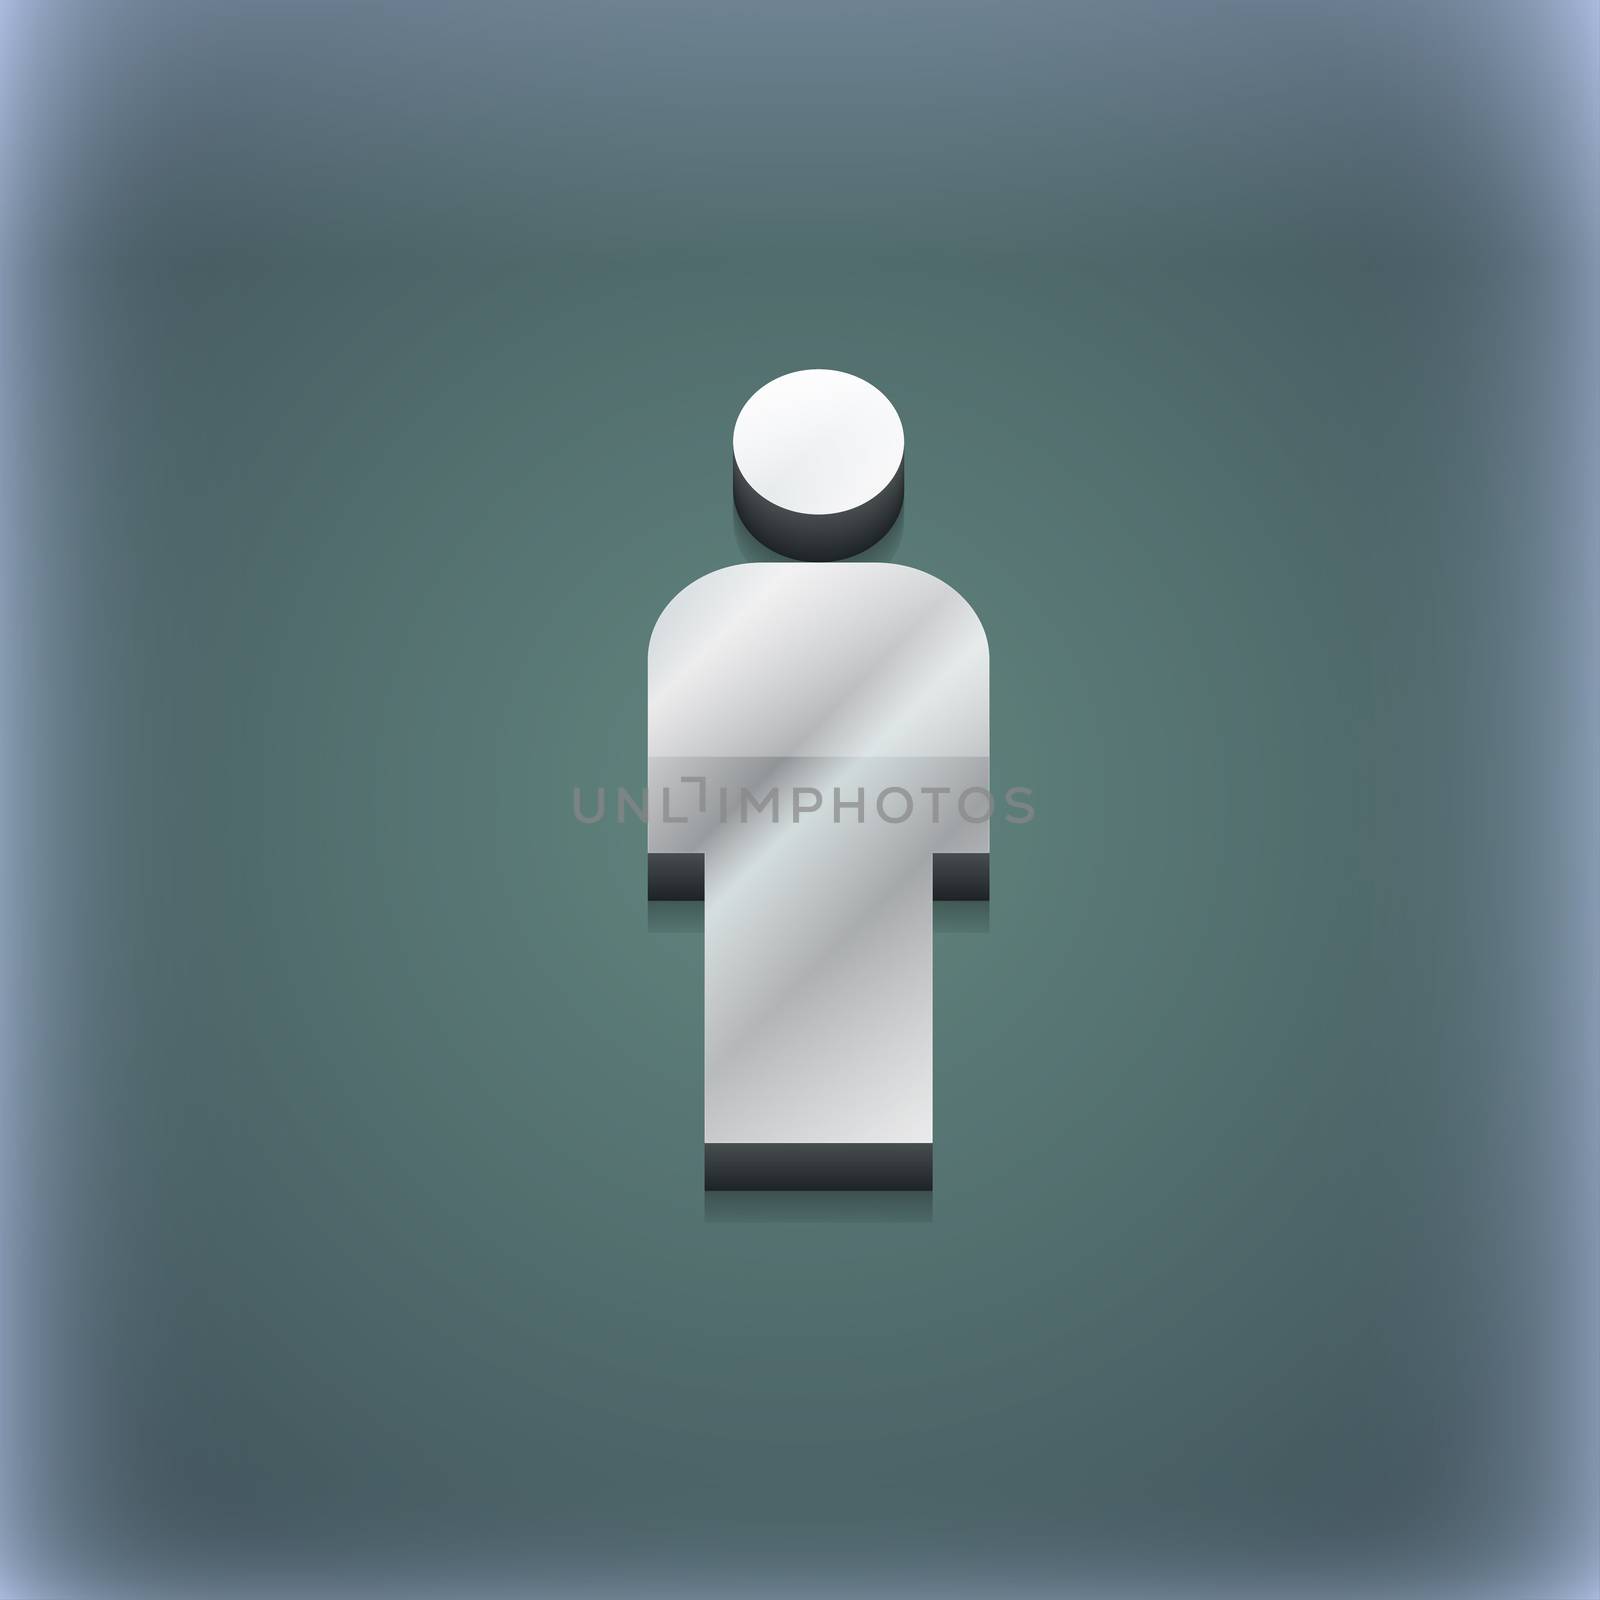 Human, Man Person, Male toilet icon symbol. 3D style. Trendy, modern design with space for your text illustration. Raster version